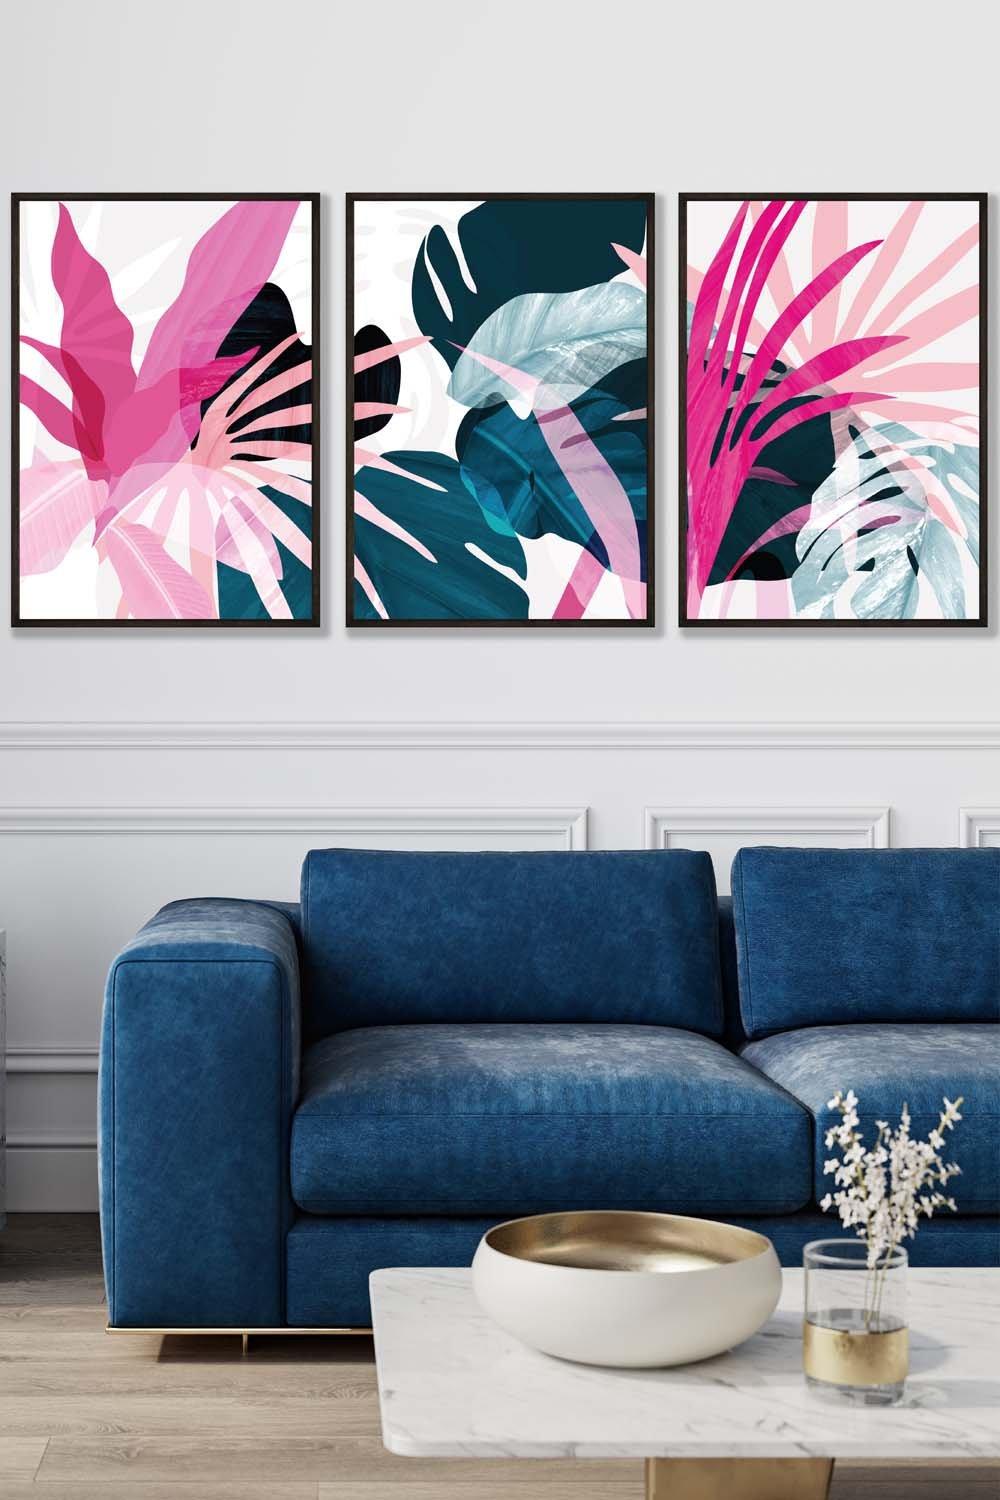 Set of 3 Black Framed Abstract Pink and Blue Tropical Triptych Wall Art